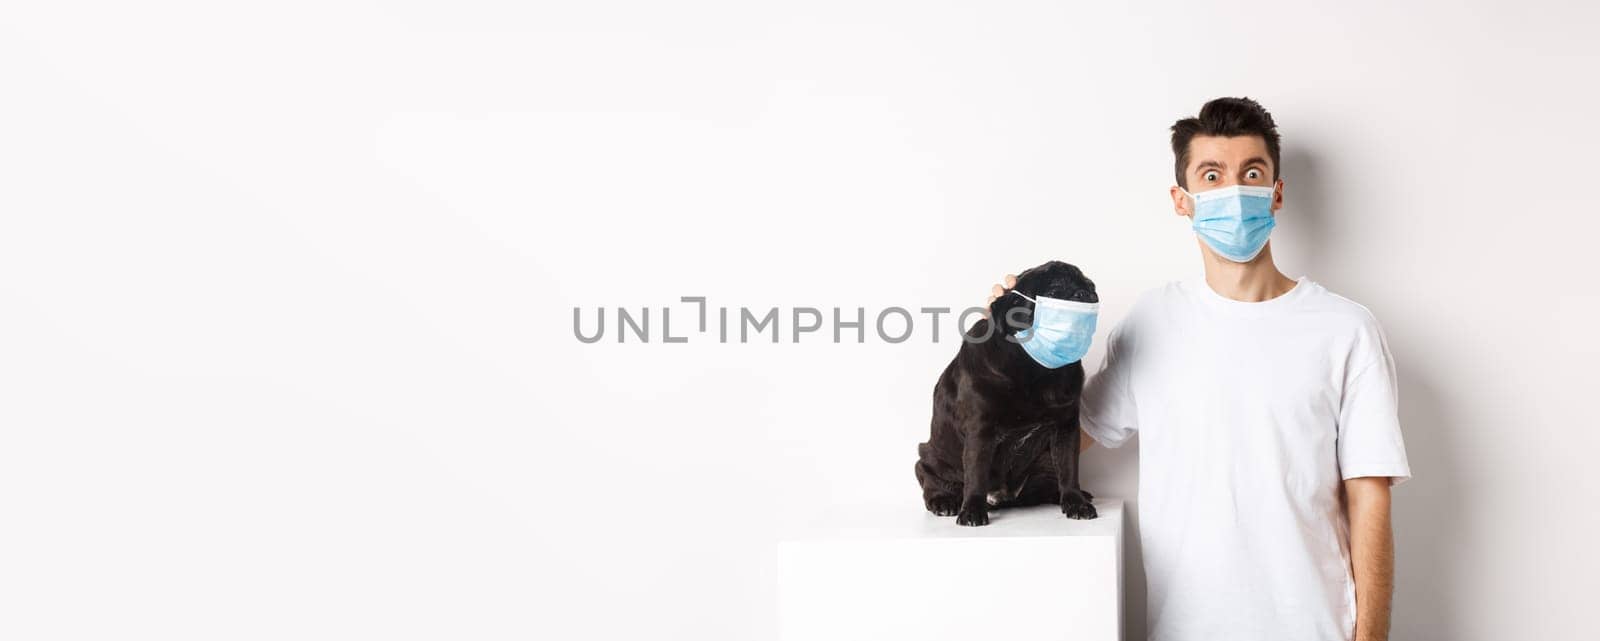 Covid-19, animals and quarantine concept. Image of funny young man and pug in medical masks, staring at camera, standing over white background.